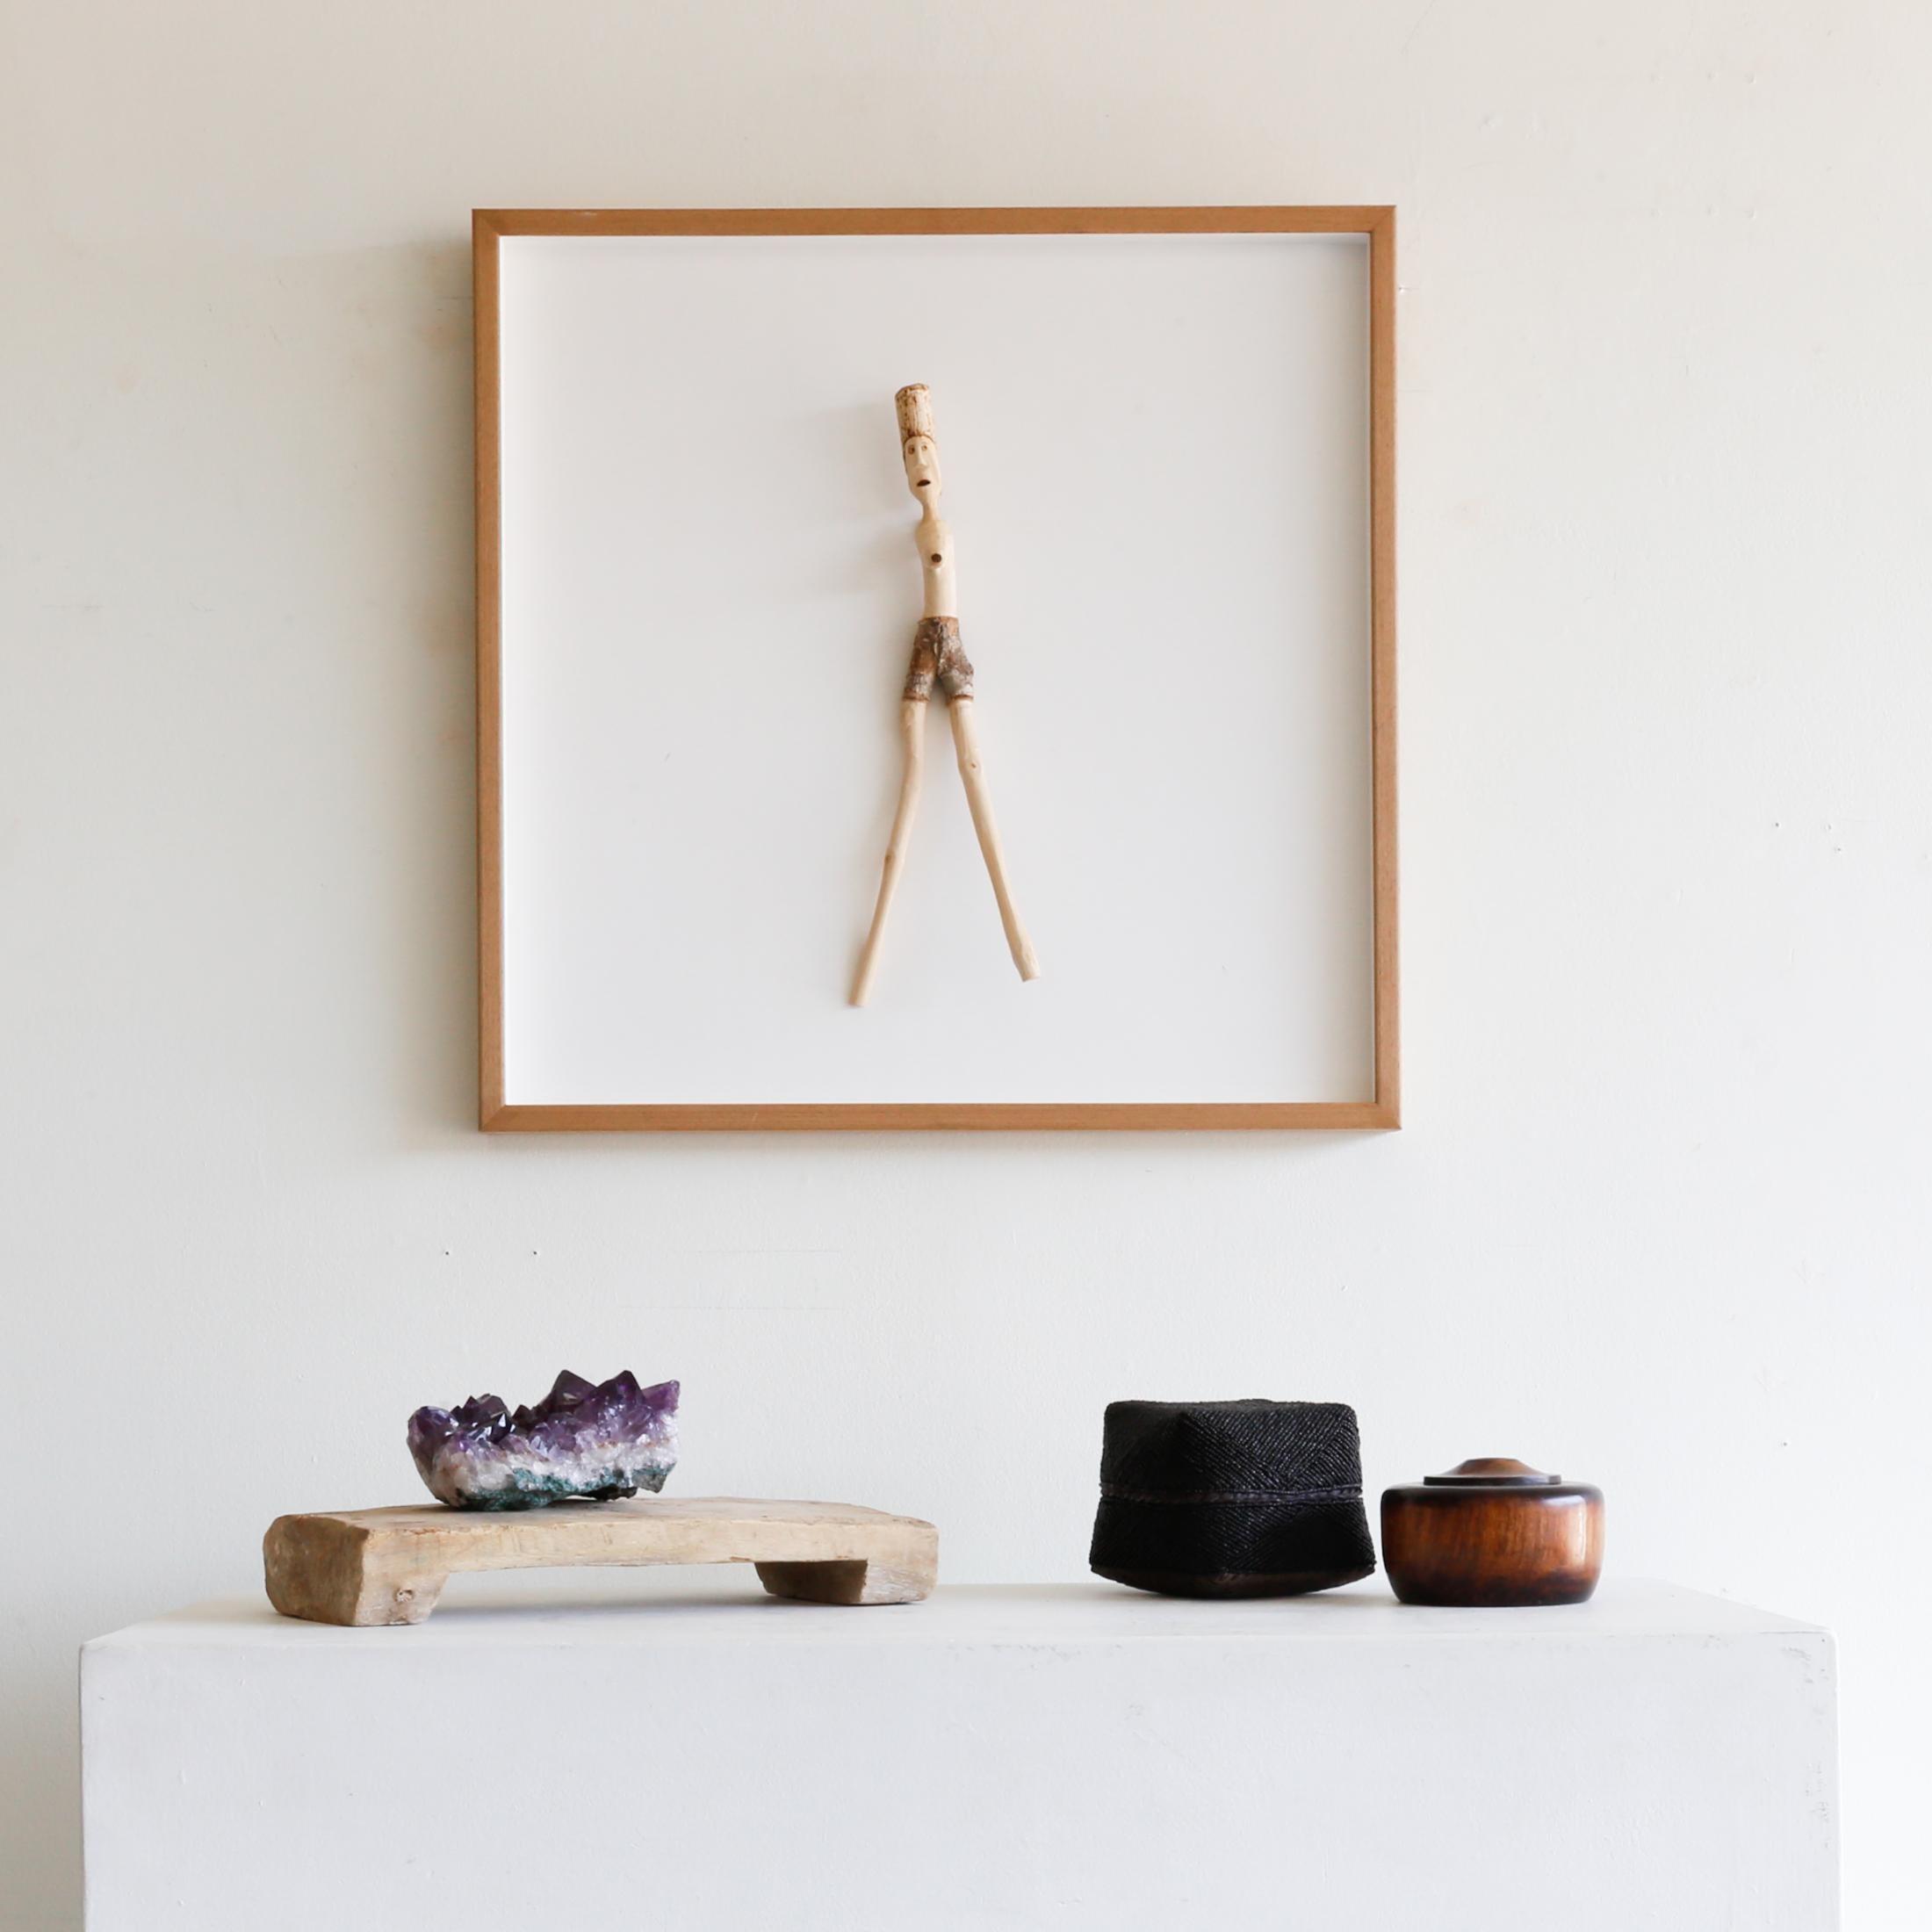 This uncanny and outlandish handmade piece features a wood figure attached to a white board in a light wood frame.